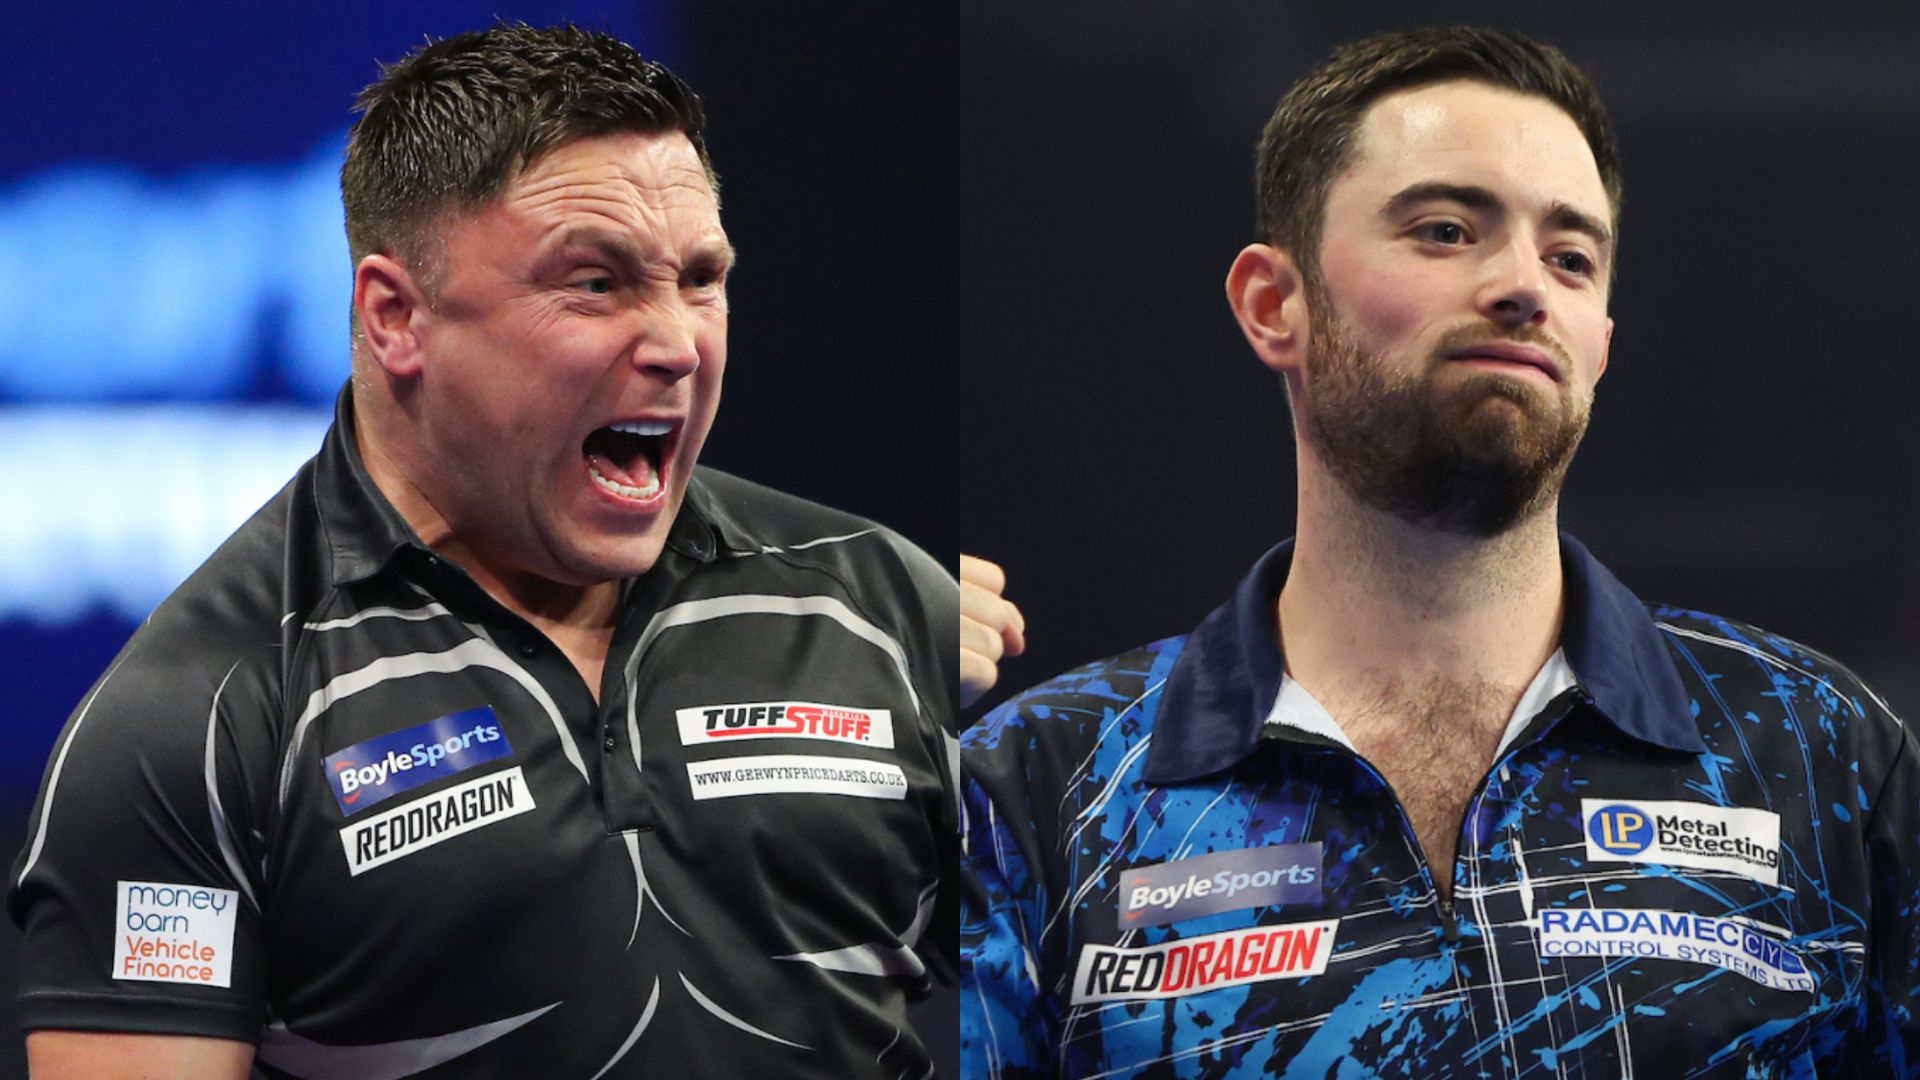 Price defeats Smith to set up World Grand Prix final against Humphries